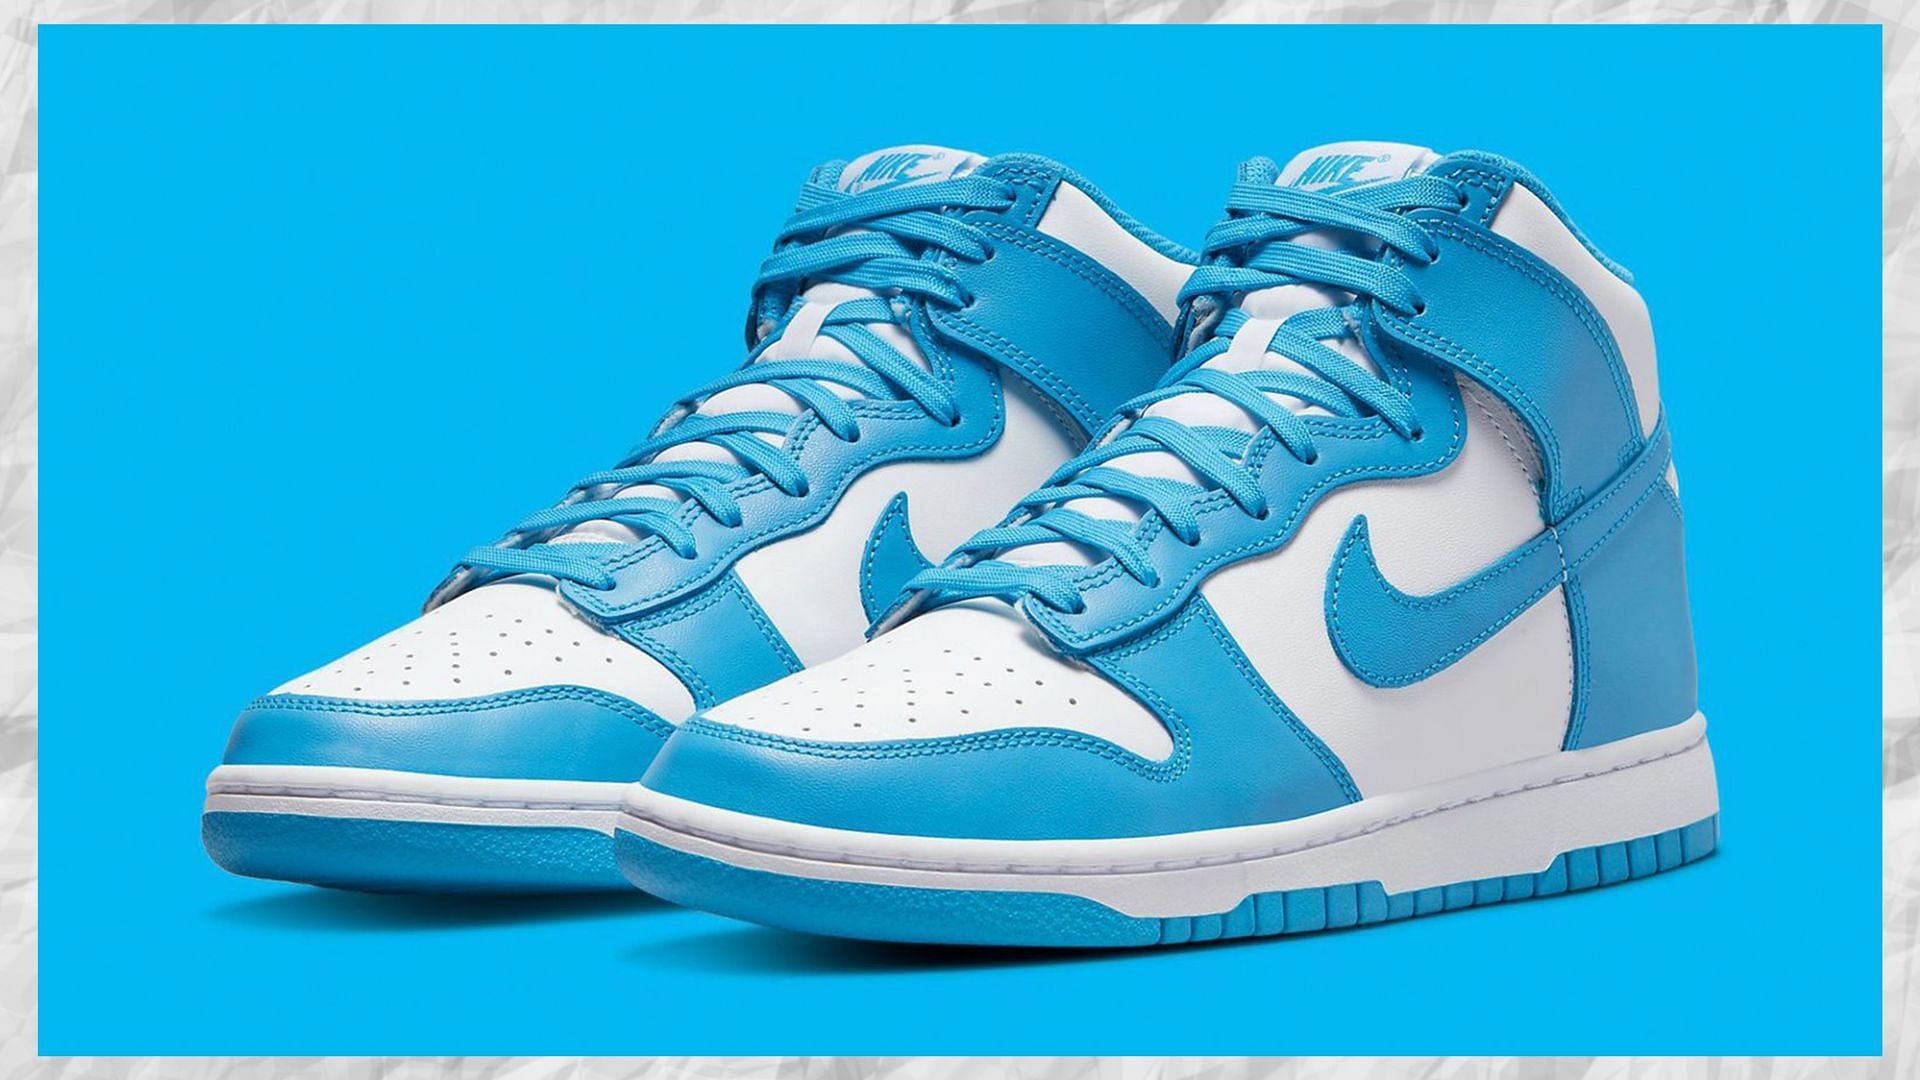 Where to buy Nike Dunk High Retro Laser Blue shoes? Price, release date ...